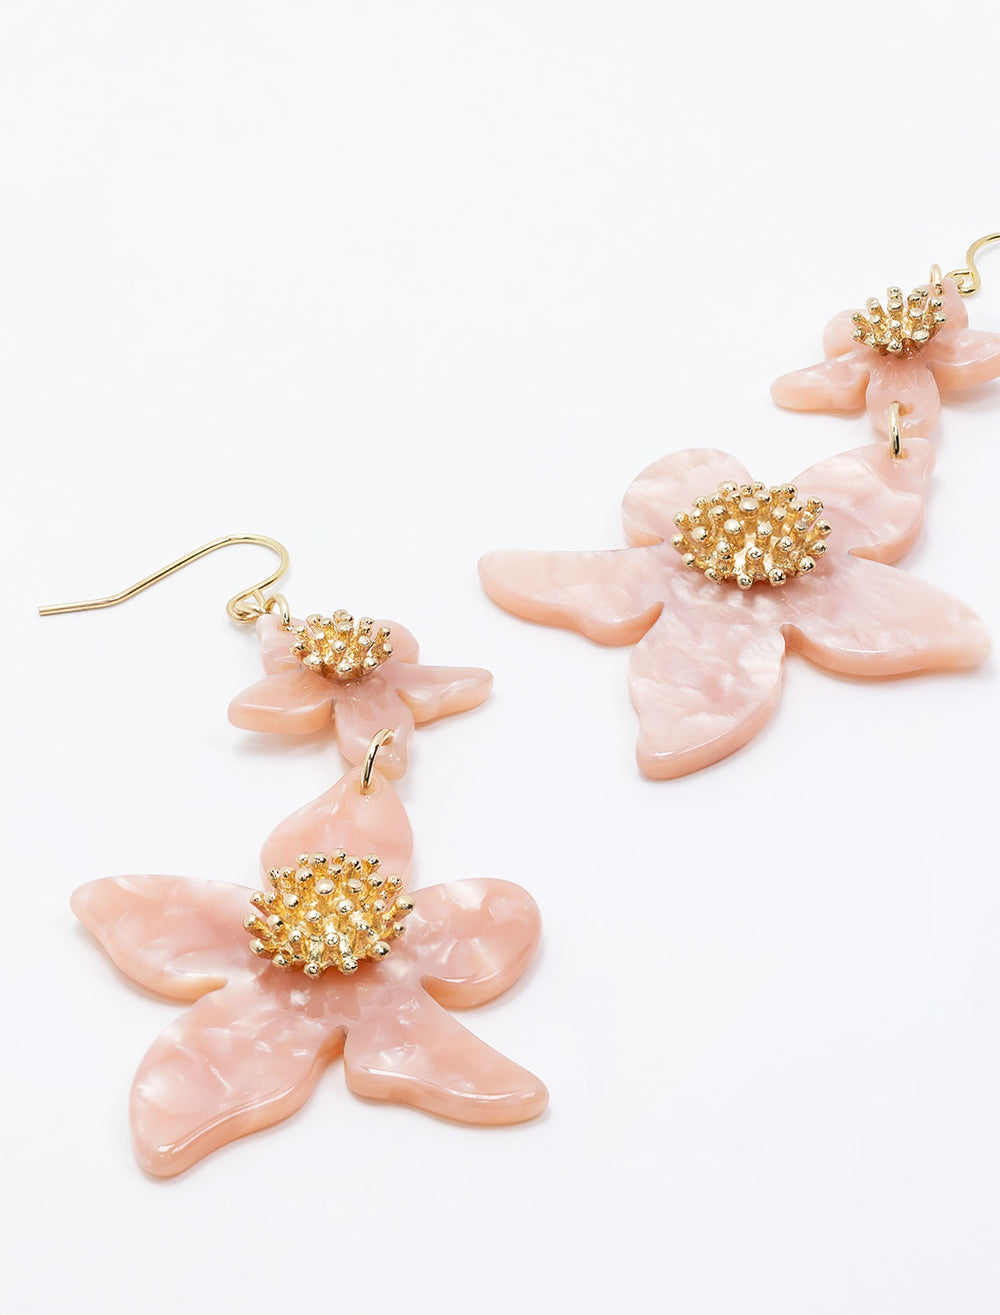 Laydown of West Eleventh's double pink flower statement earrings.